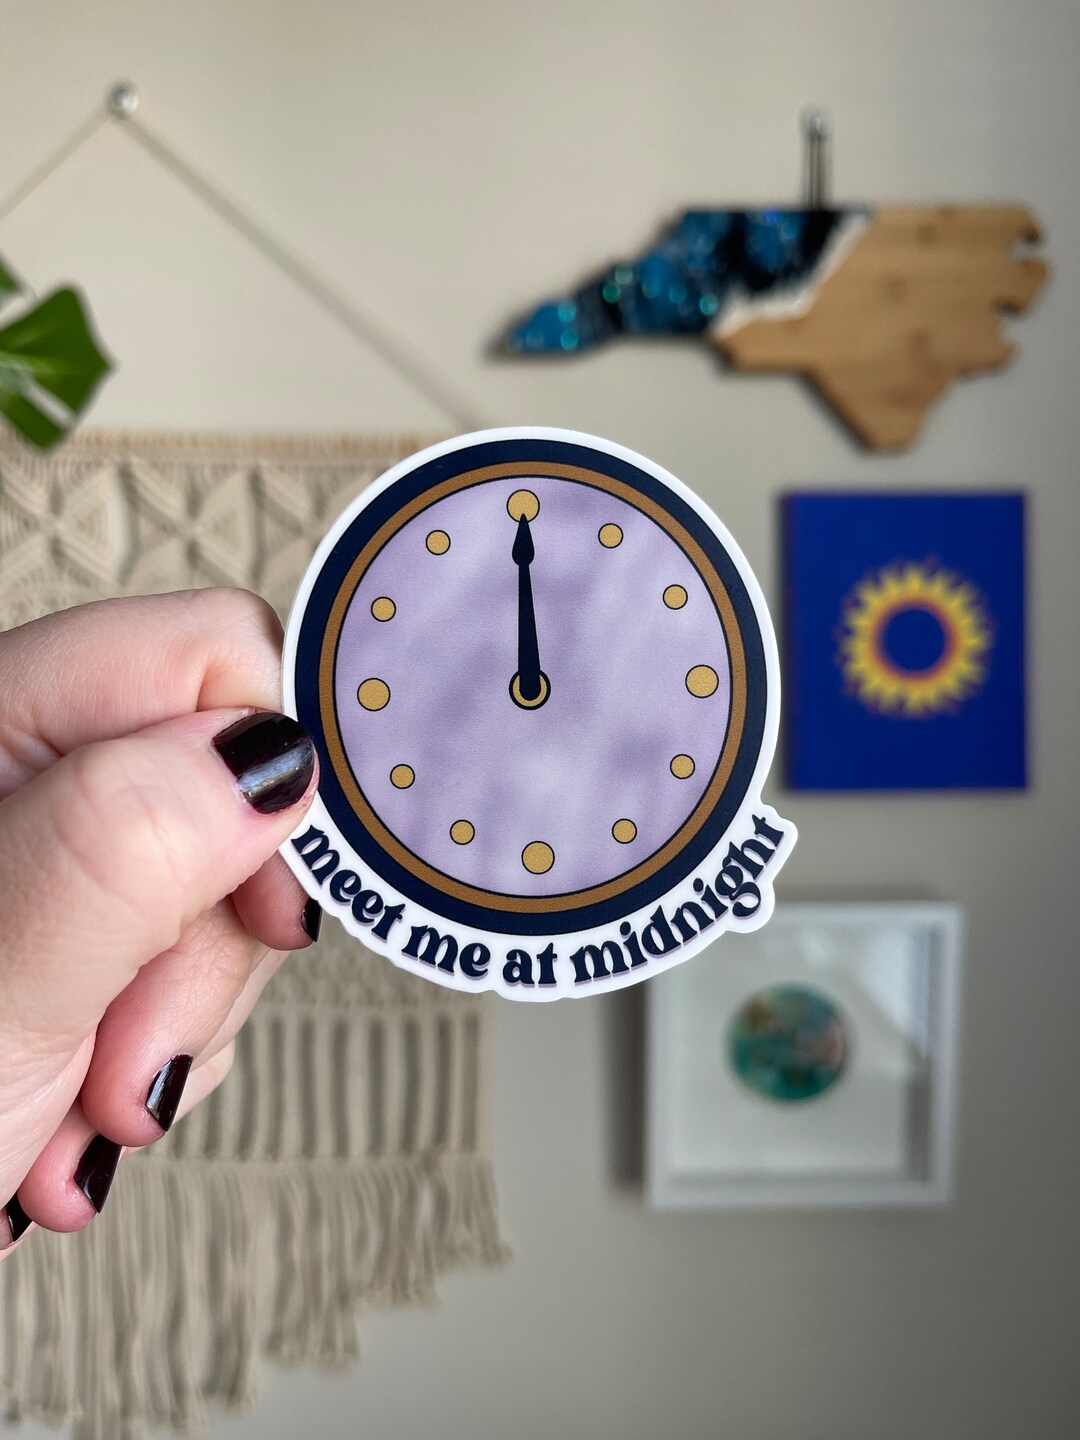 For those wondering, the vinyl clock comes with a template to help you hang  it! Also has stickers to cover the barcodes which is nice. : r/TaylorSwift